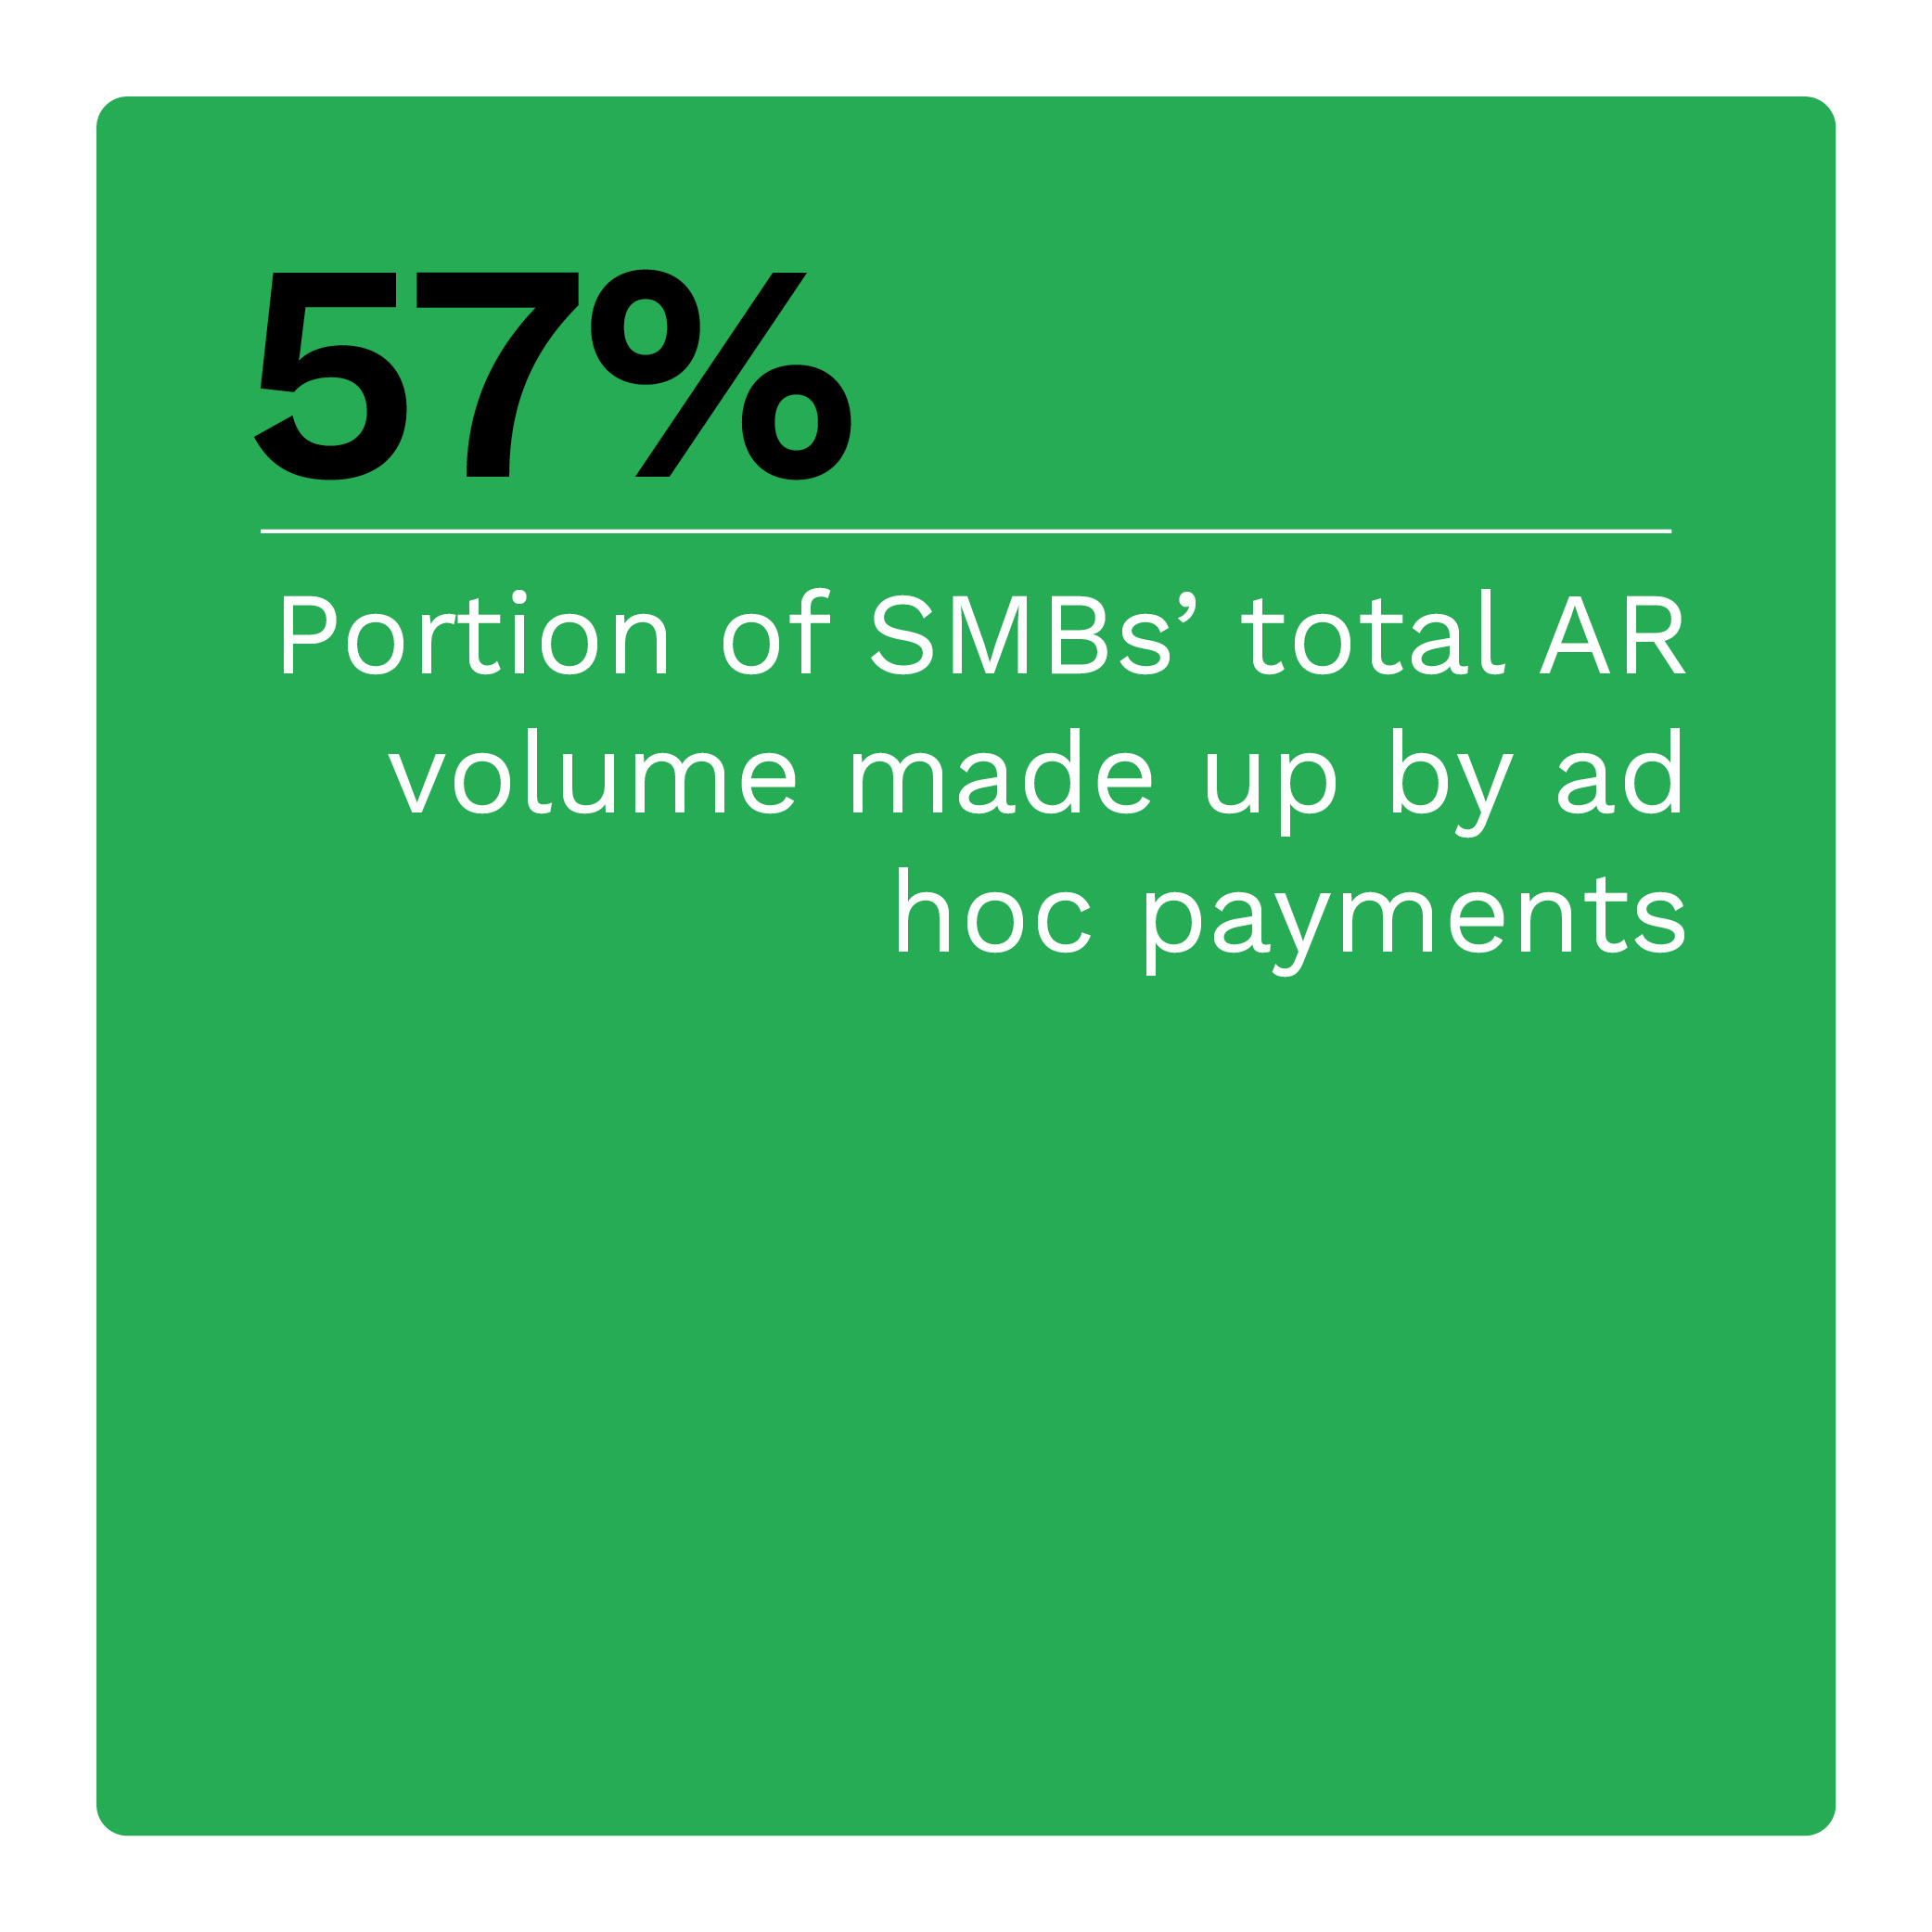 57%: Portion of SMBs’ total AR volume made up by ad hoc payments